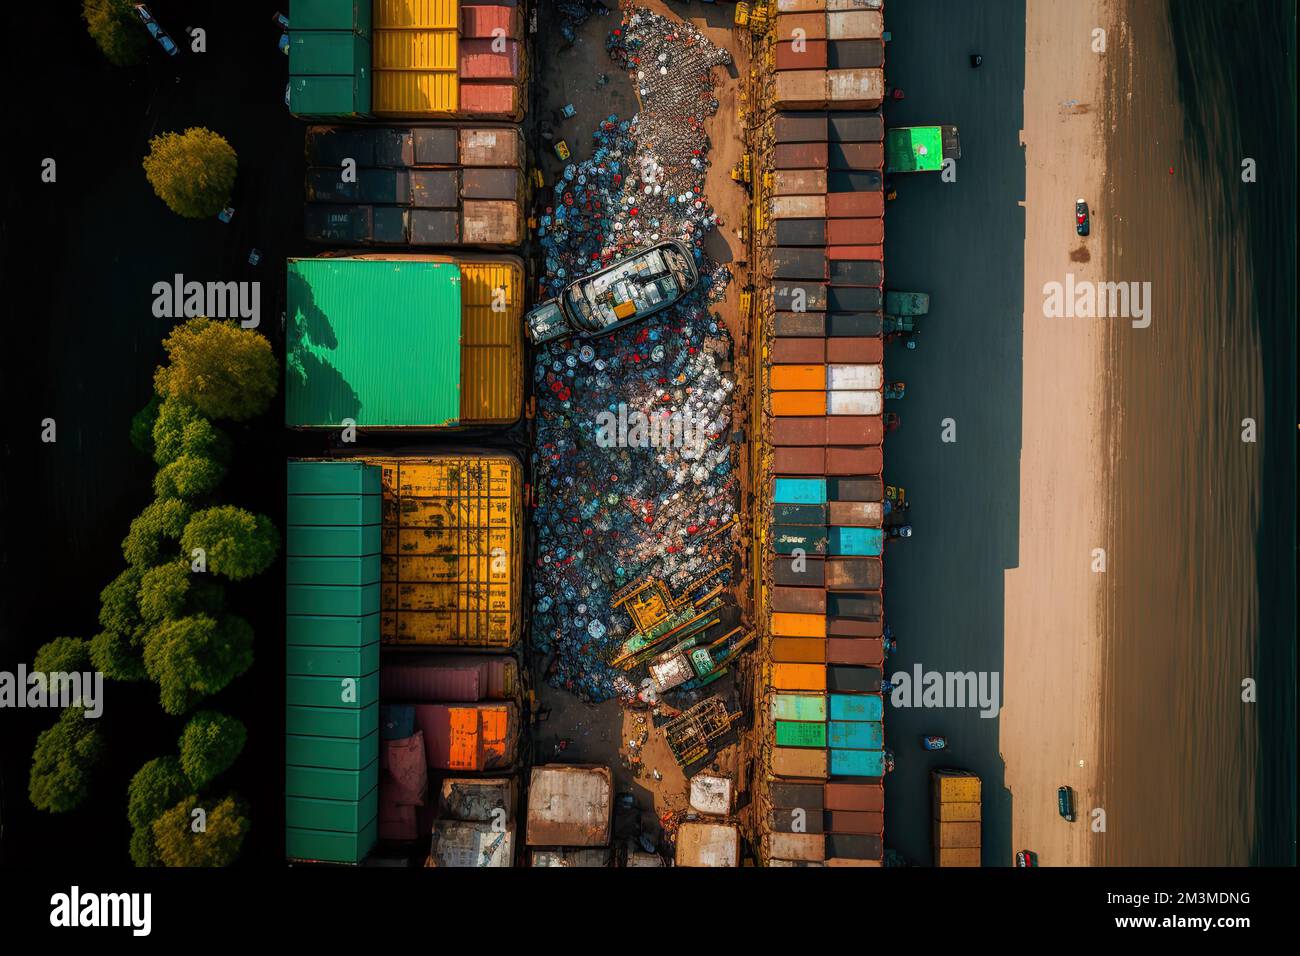 observation from the sky of a large metropolitan landfill where sorting of rubbish is taking place. Symbolizing a situation of ecological crisis and Stock Photo